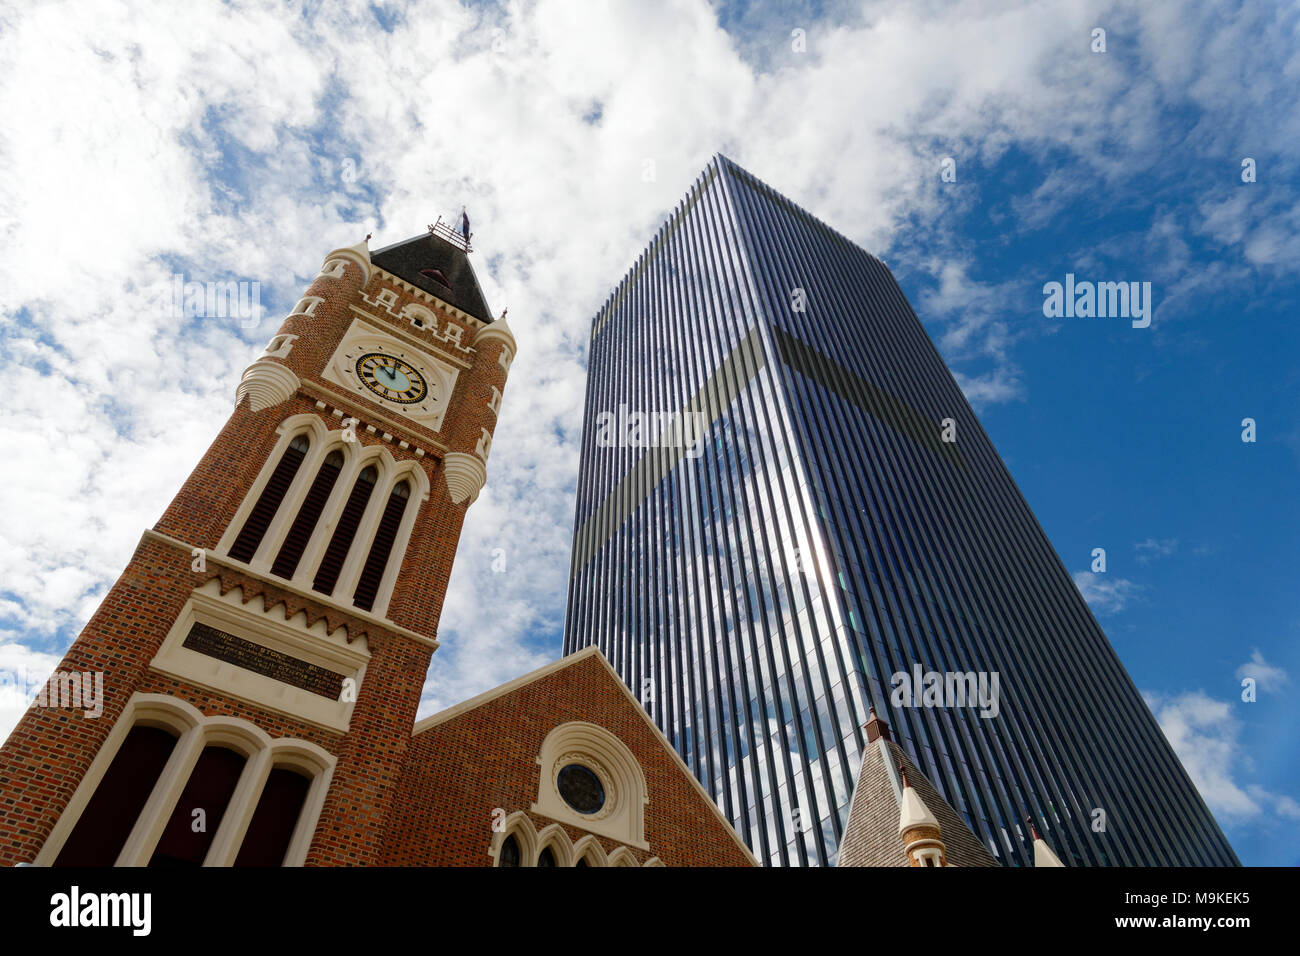 Historical Perth Town hall and modern Supreme court building, Perth, Western Australia Stock Photo